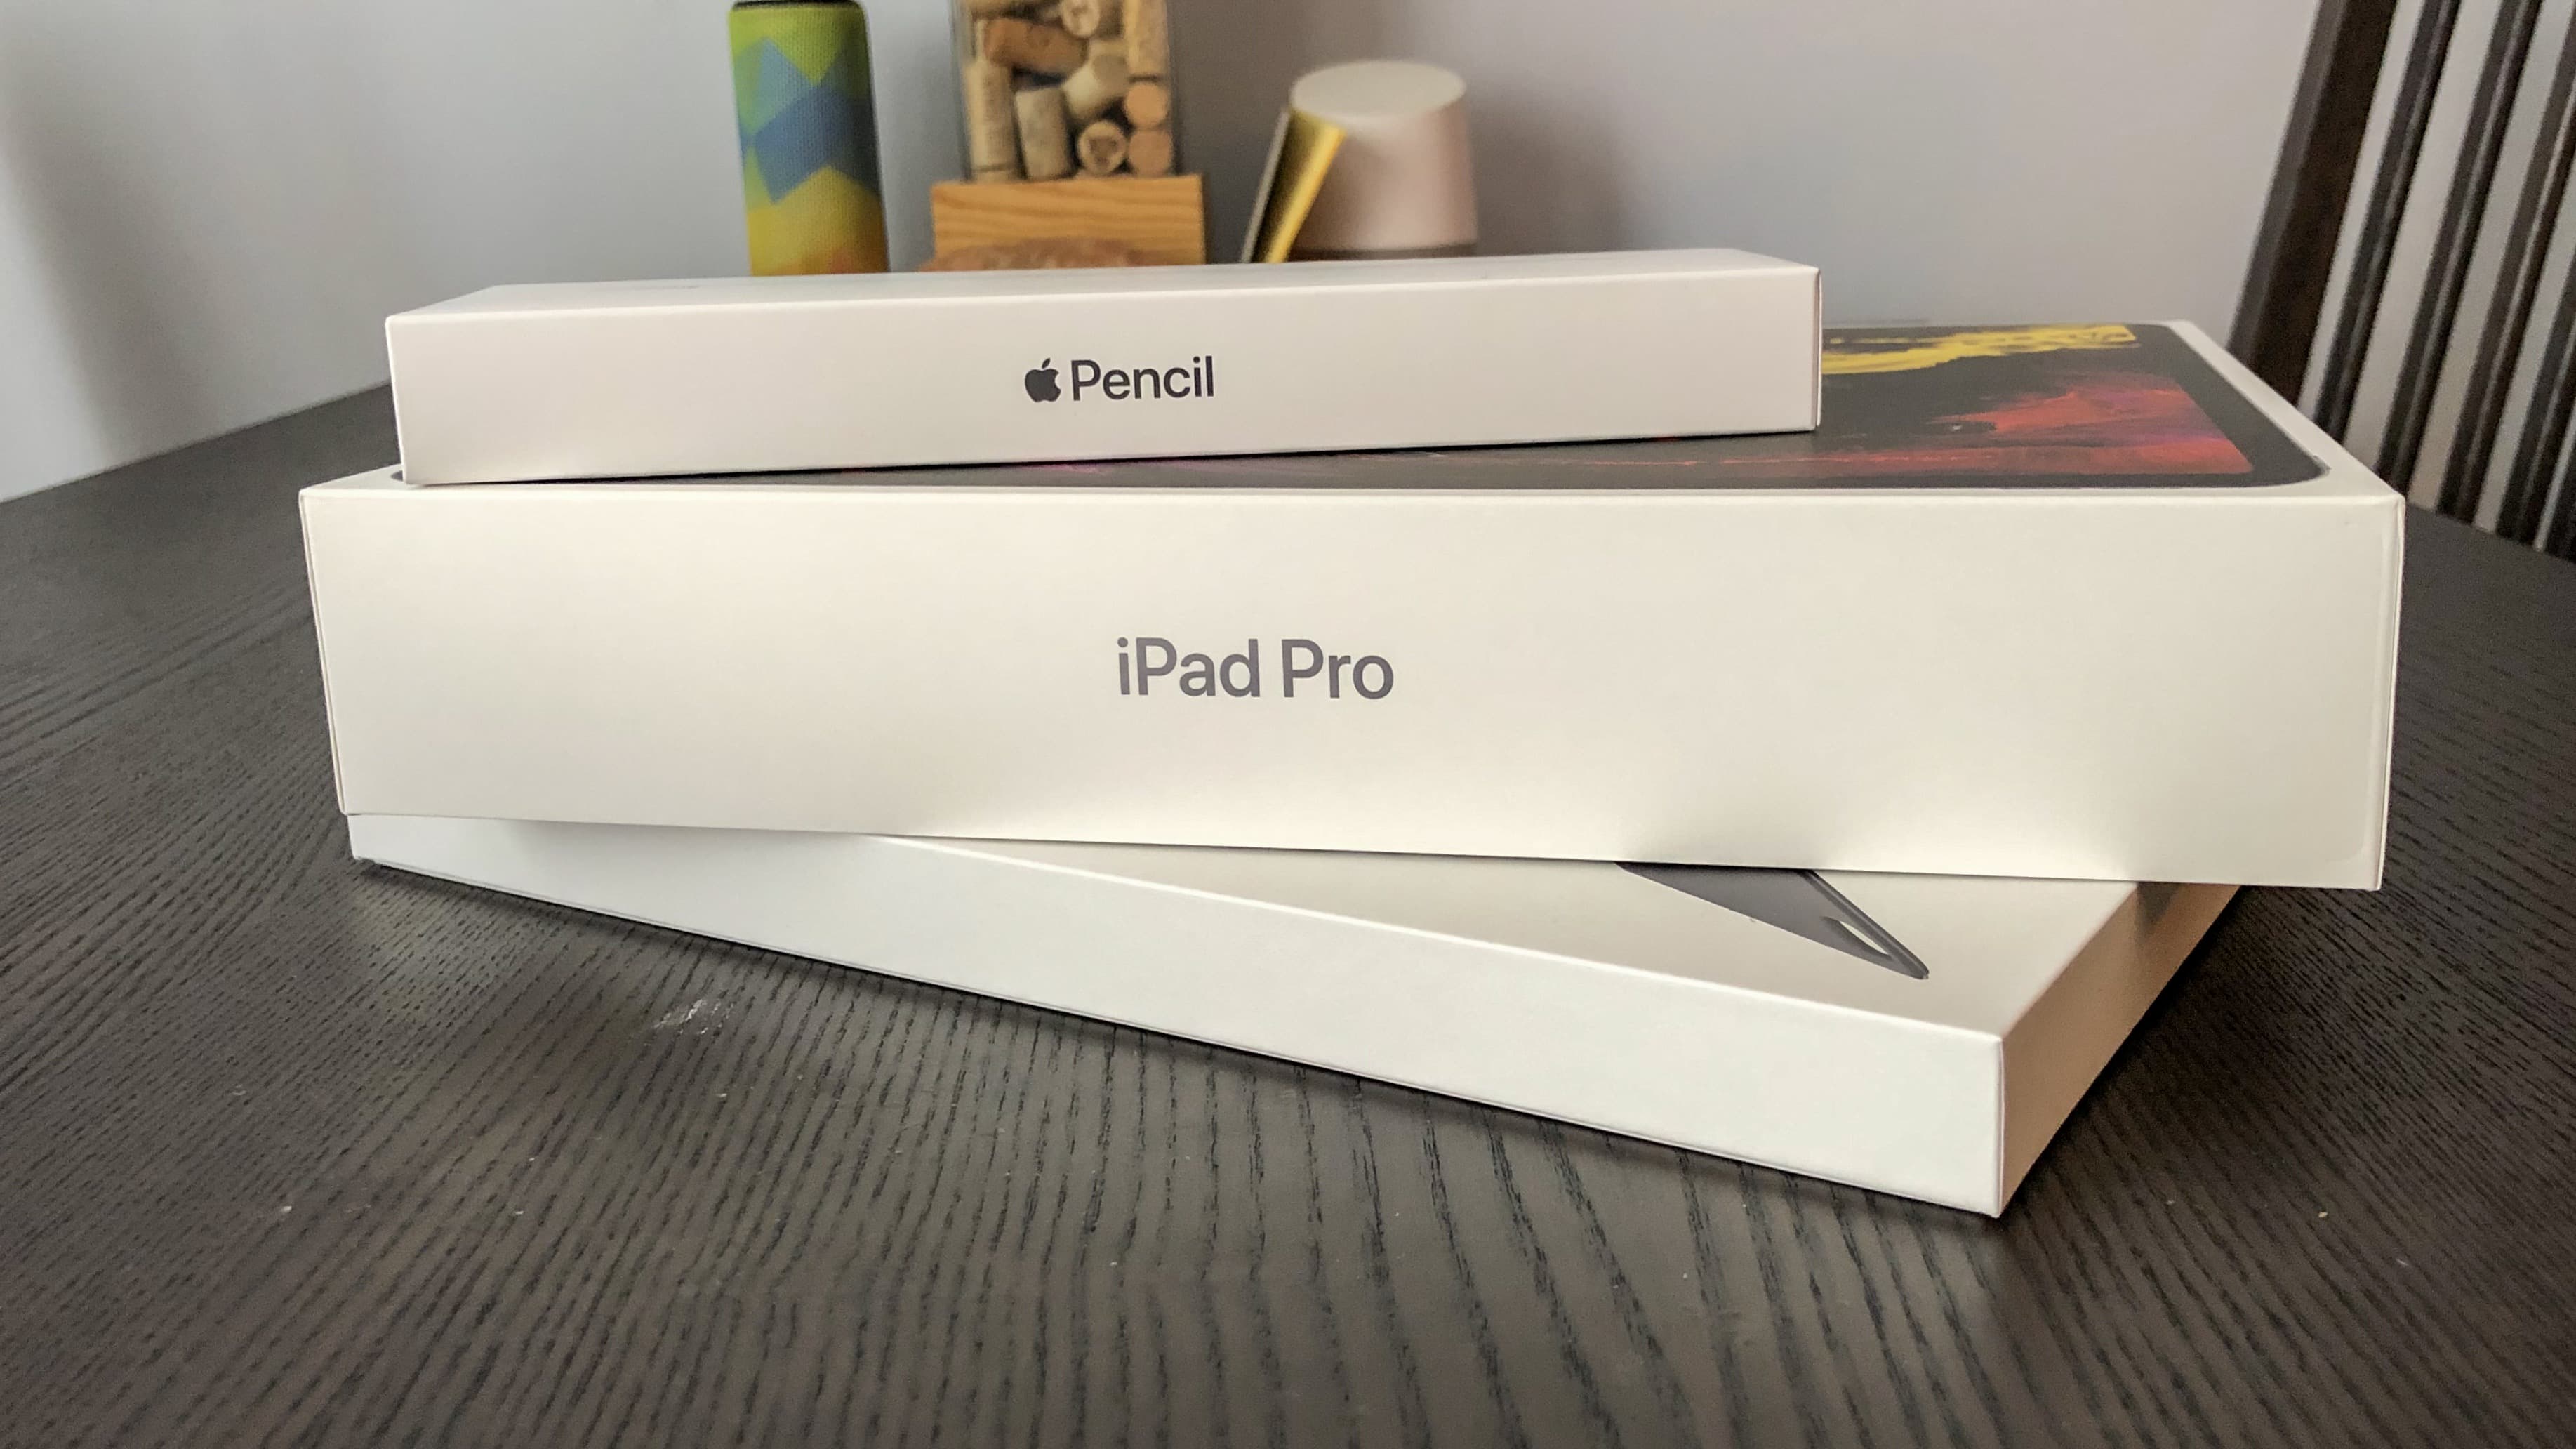 Boxes for iPad Pro Apple Pencil and Smart Keyboard